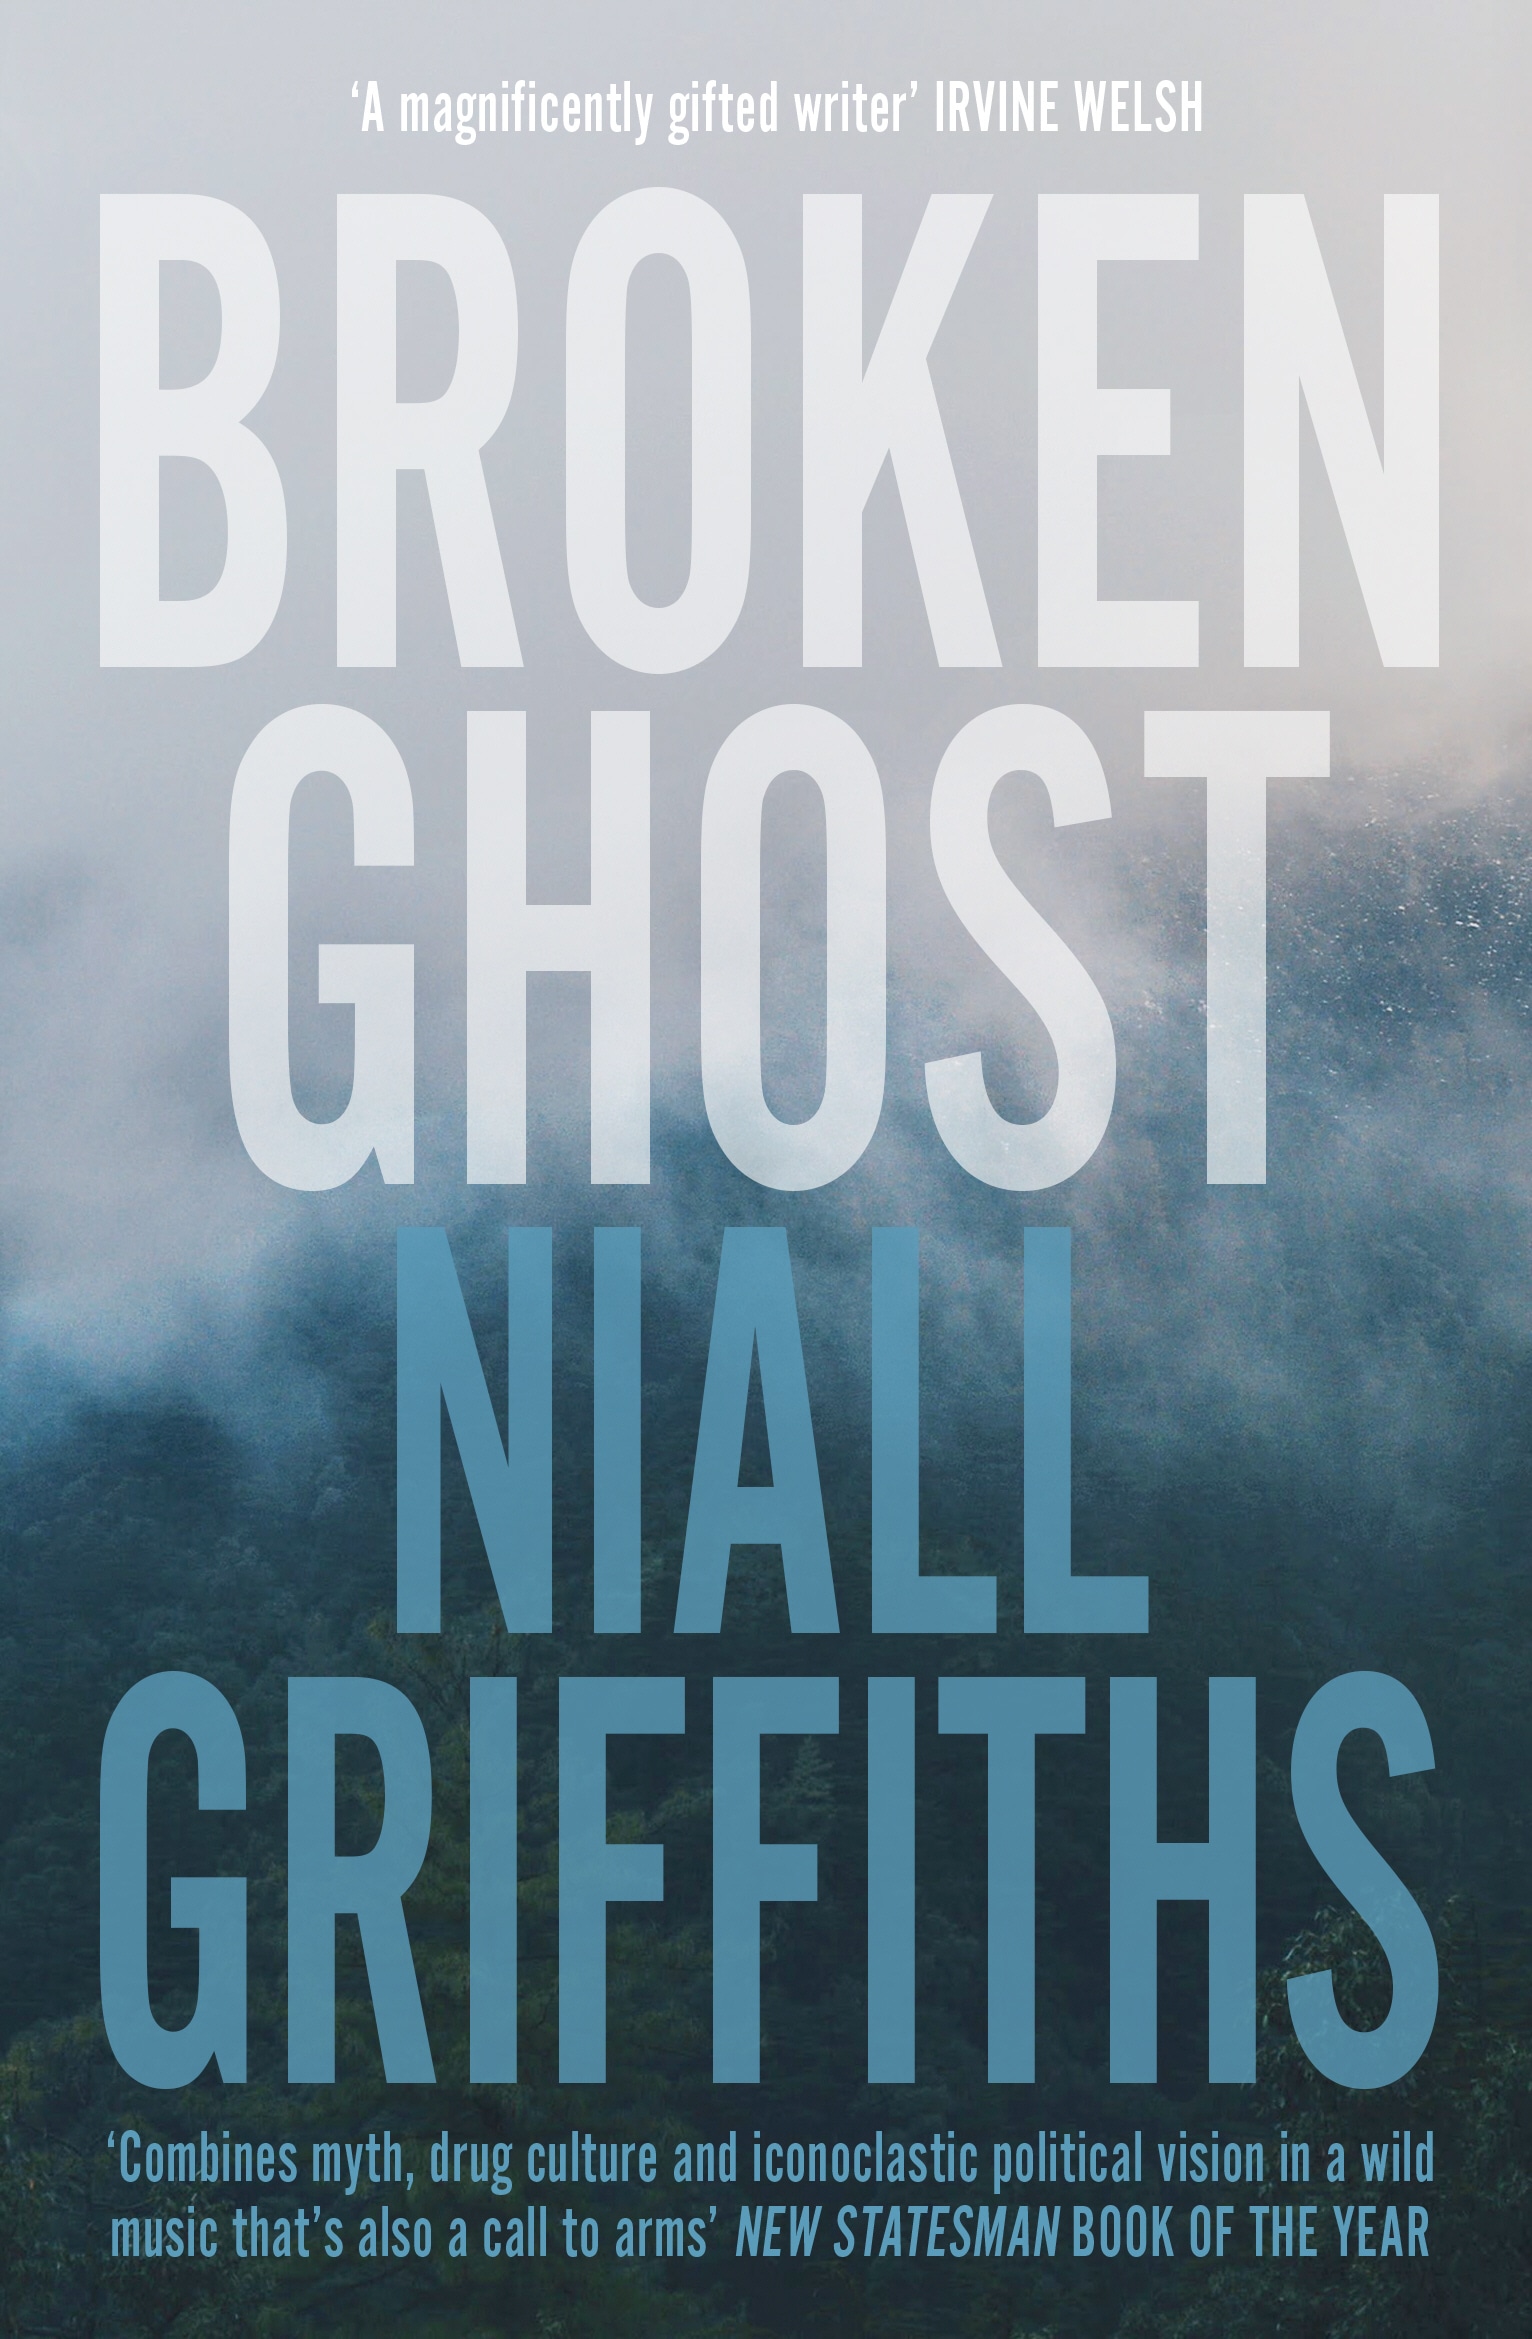 Book “Broken Ghost” by Niall Griffiths — August 13, 2020